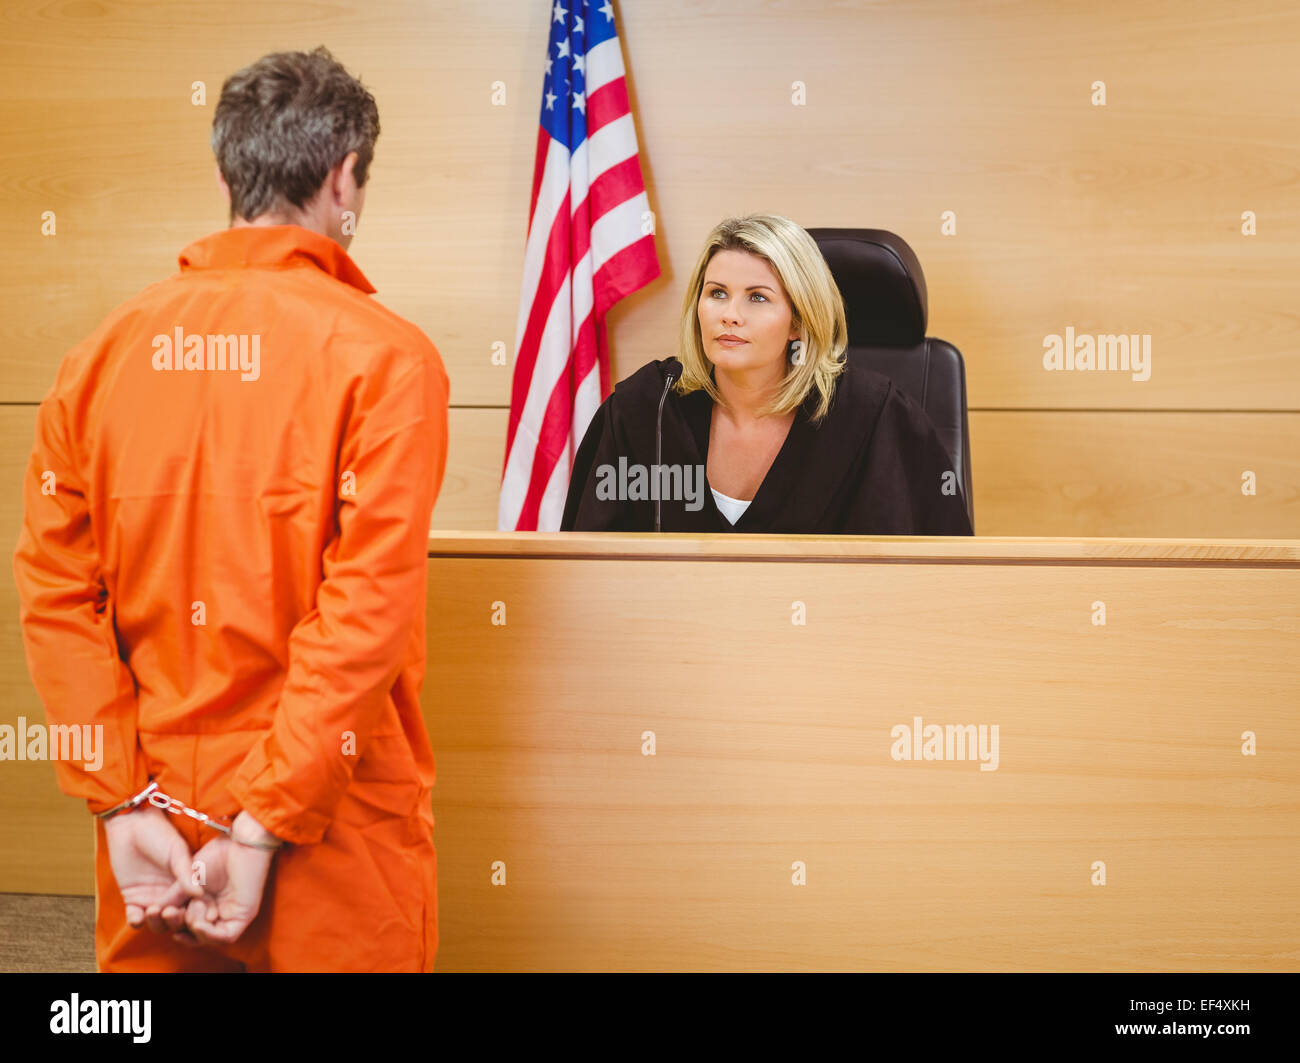 Judge and criminal speaking in front of the american flag Stock Photo